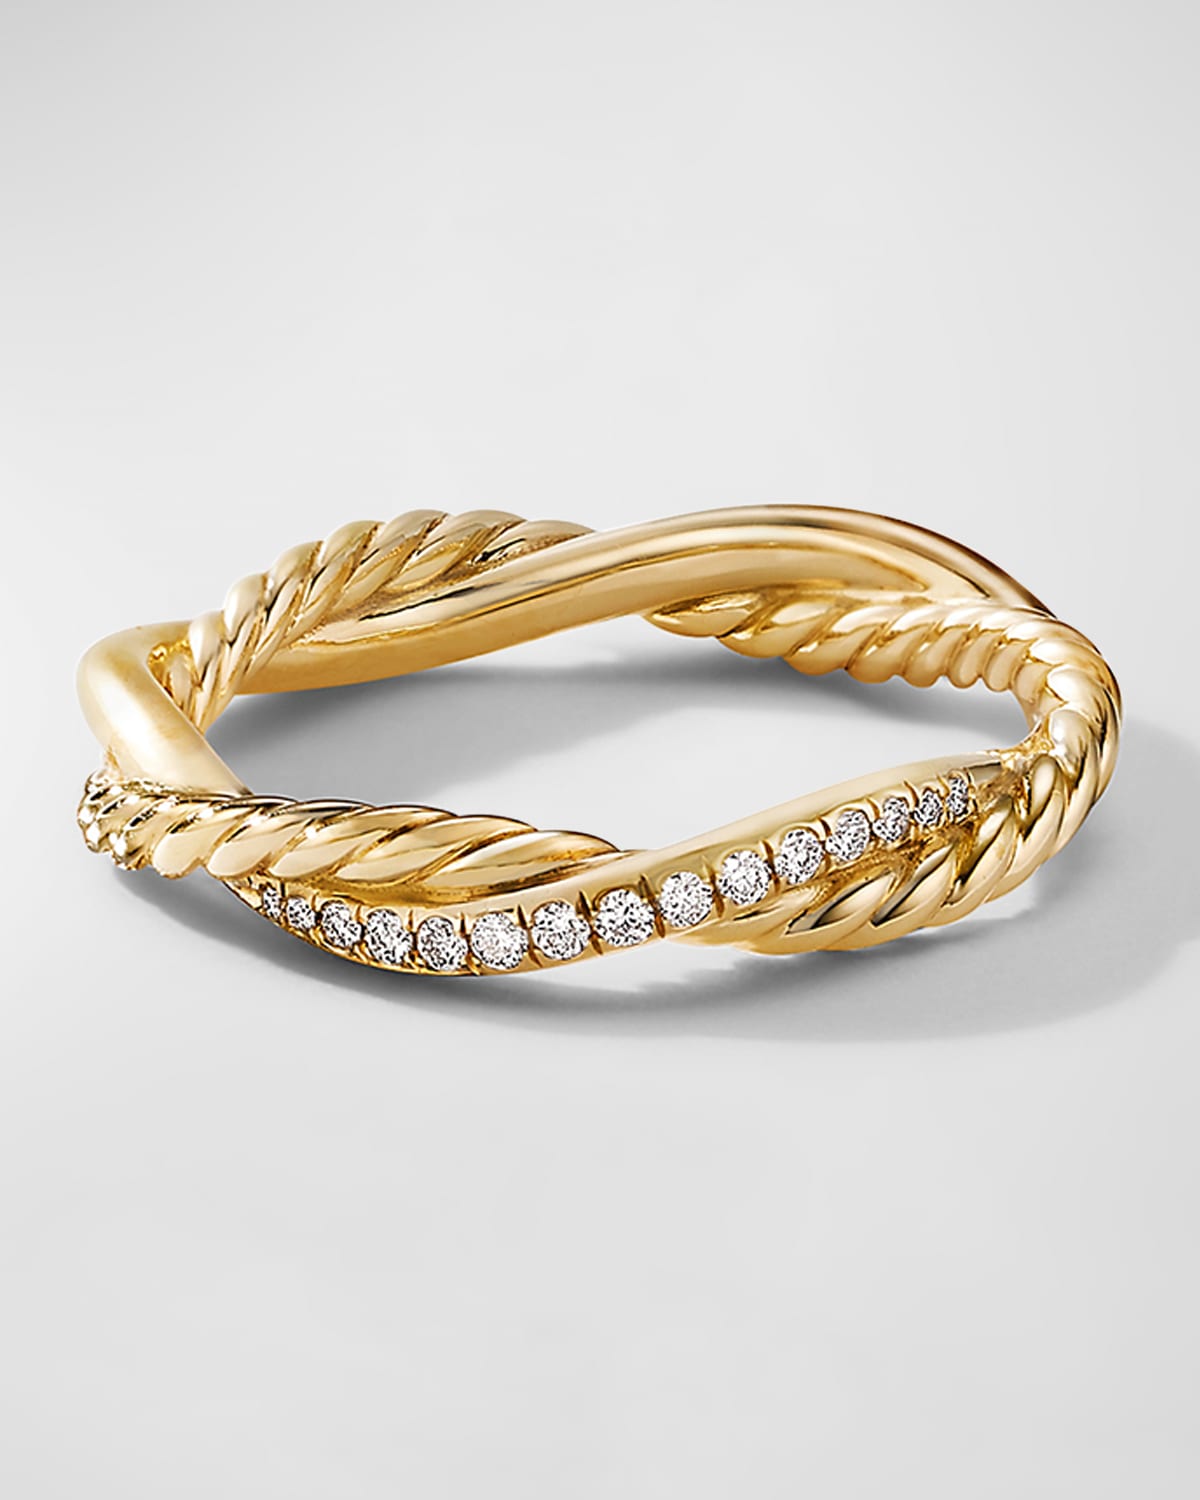 Petite Infinity Band with Diamonds in 18K Gold, 4mm